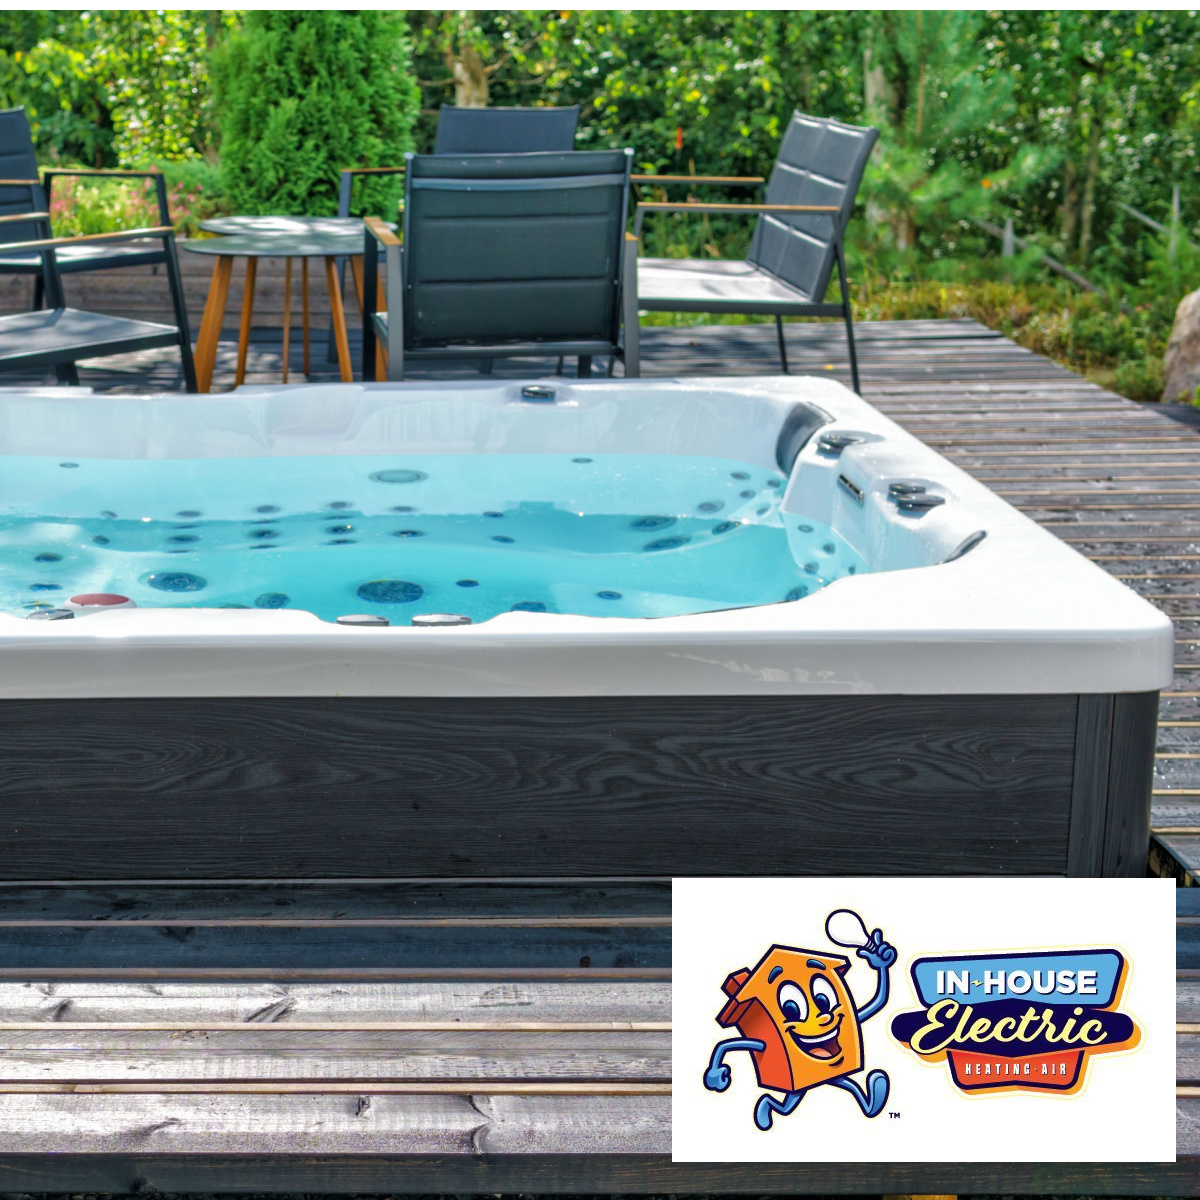 Your Trusted Renton Hot Tub Electricians